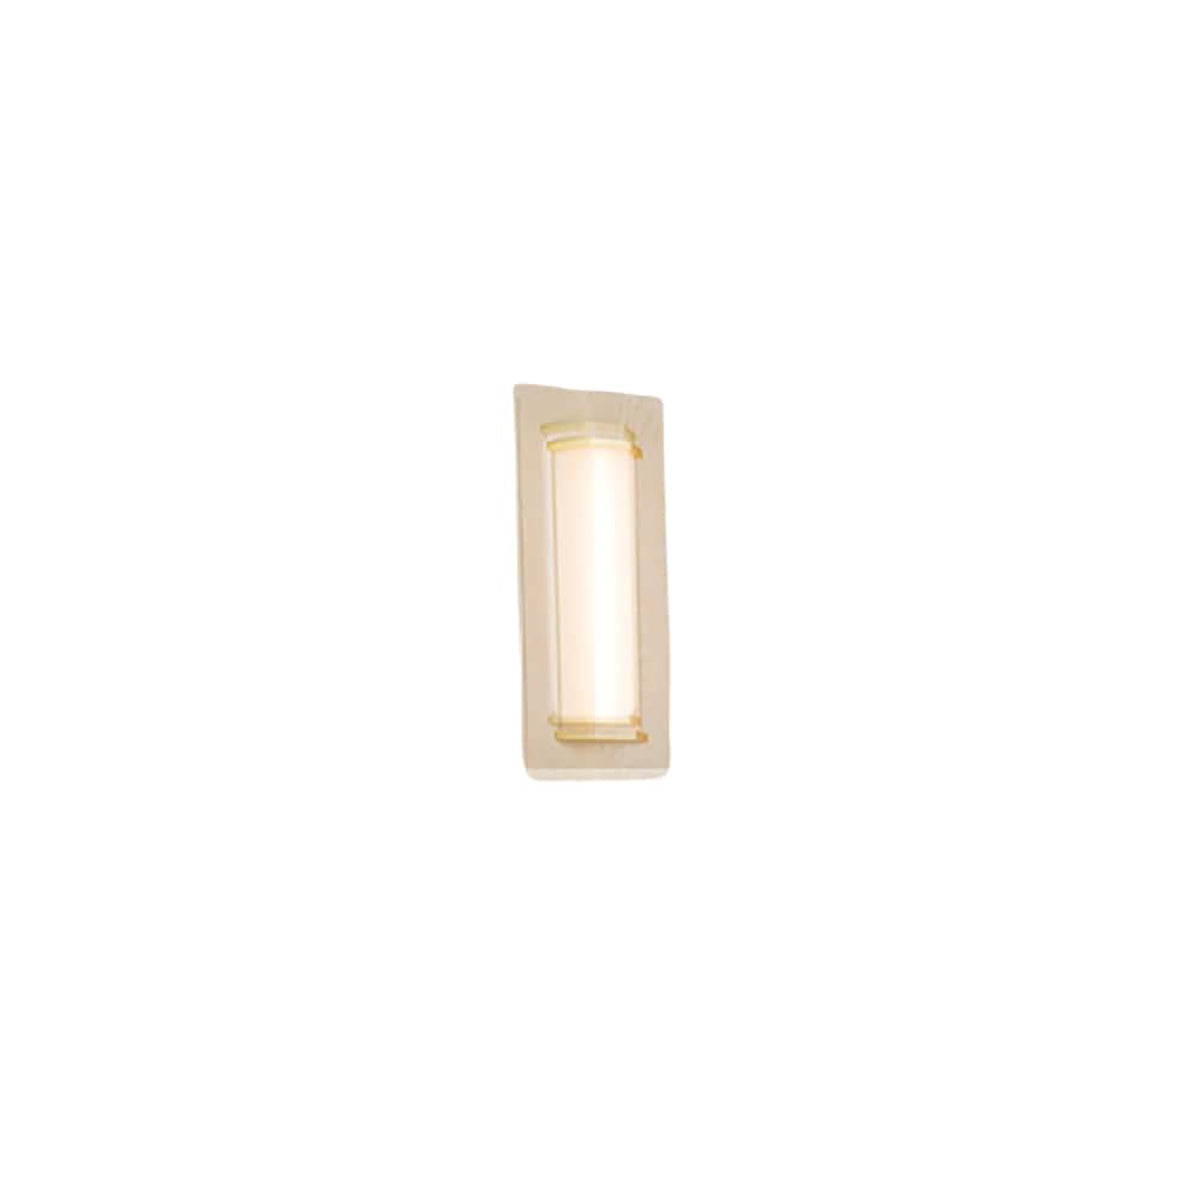 Penna 16 LED Sconce with P2 Driver